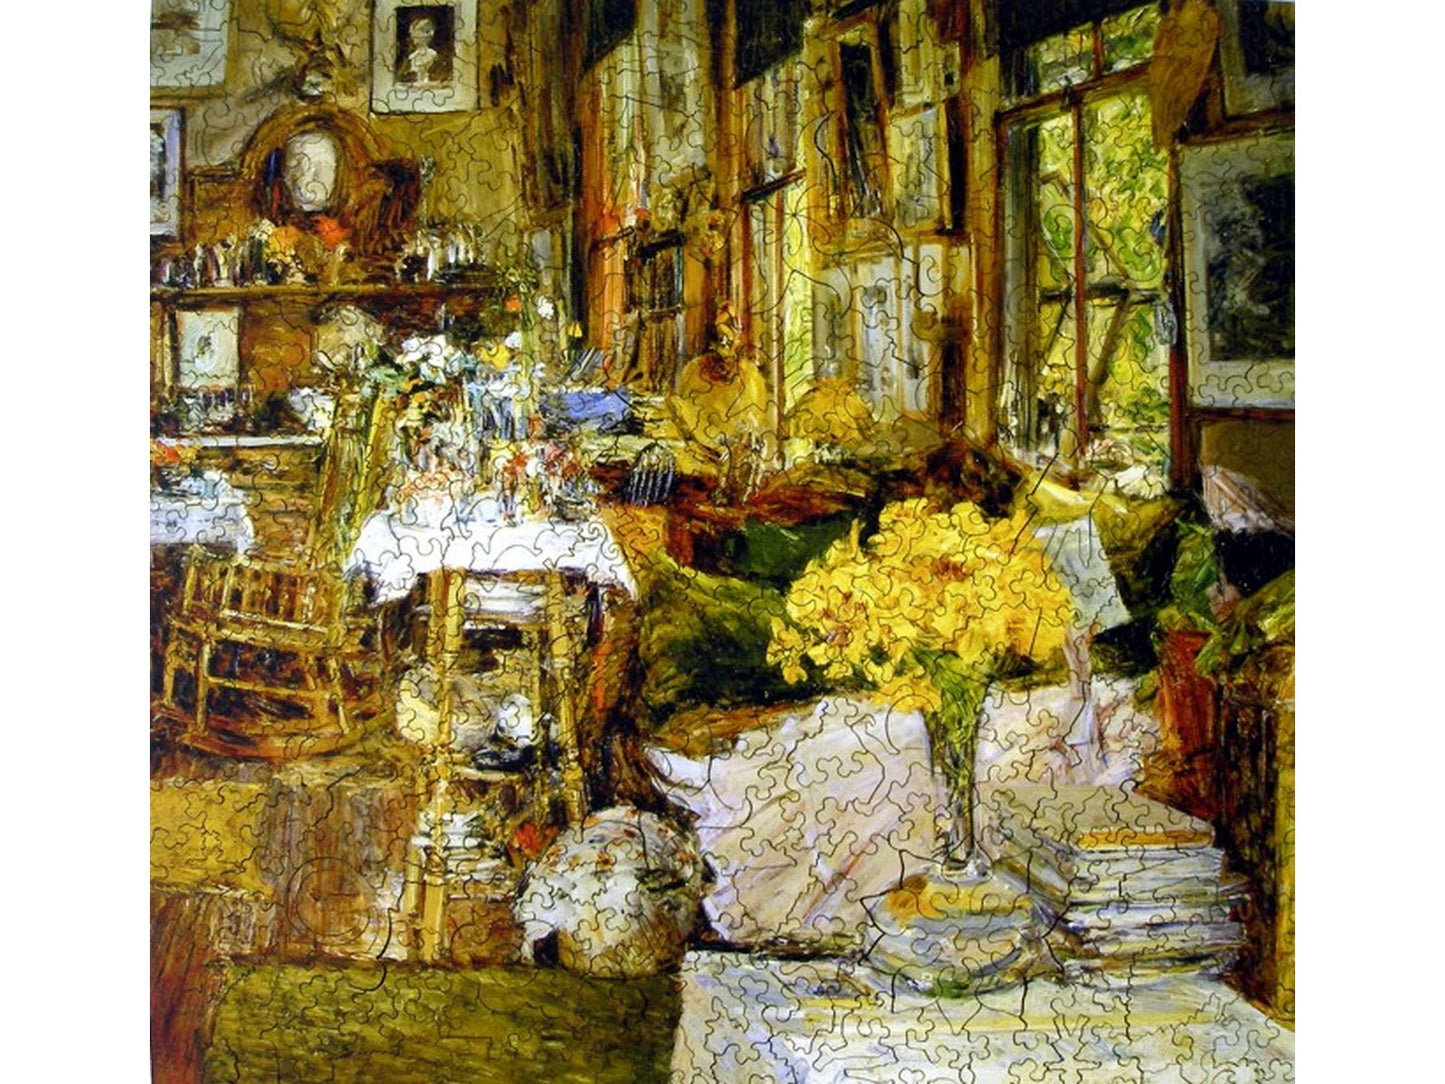 The front of the puzzle, The Room of Flowers, which shows a room with a vase of flowers.